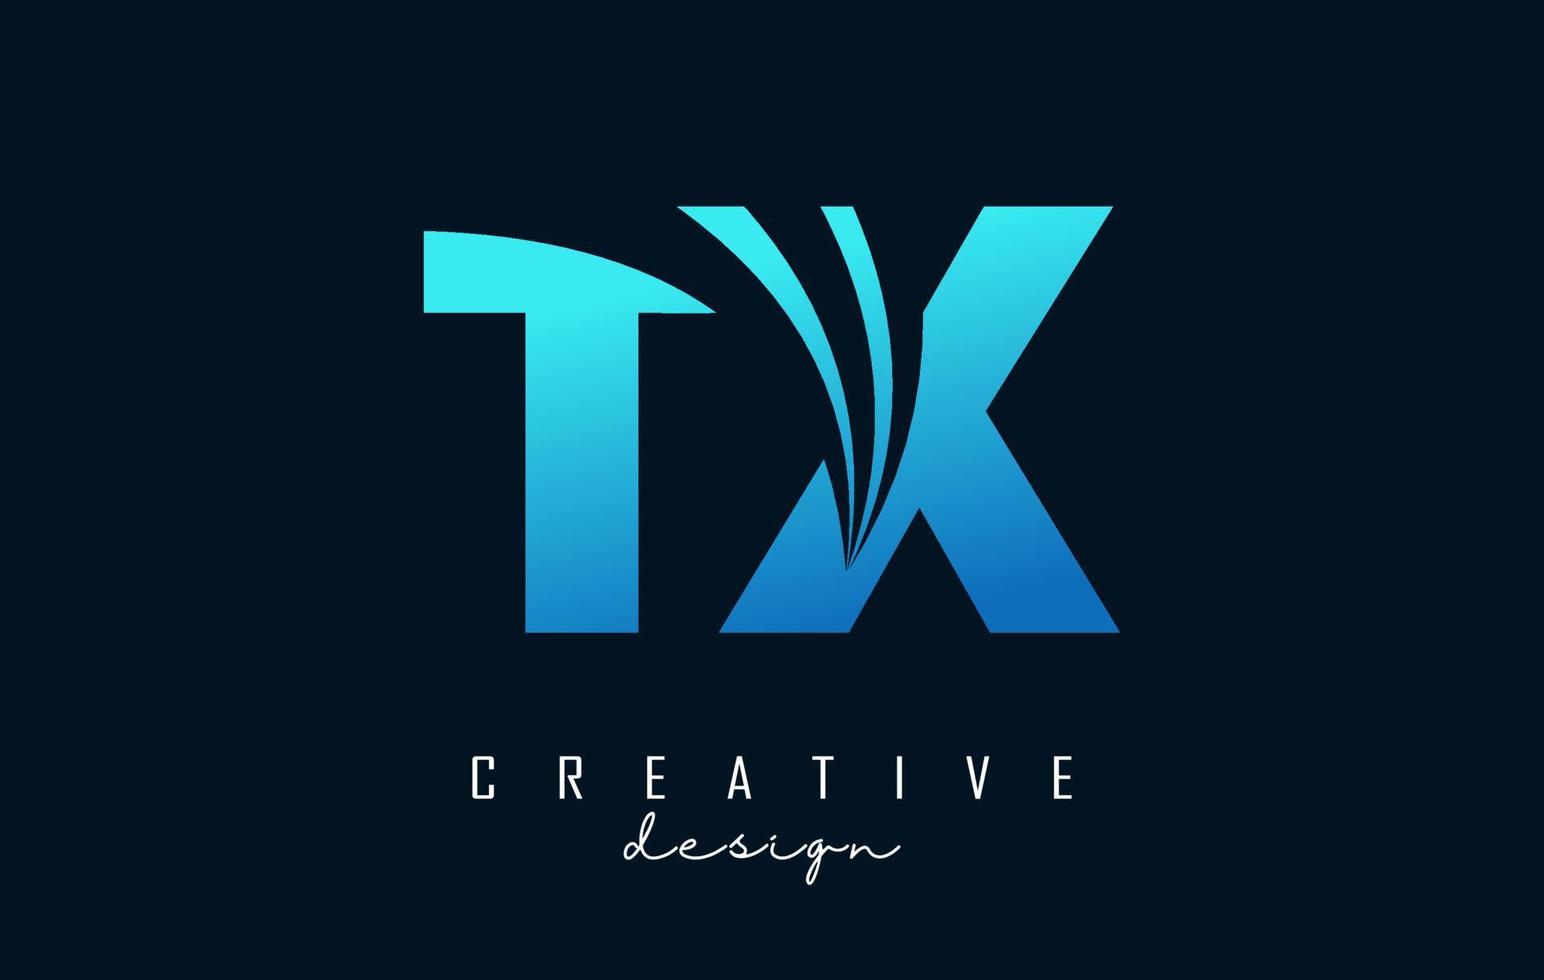 Creative blue letters TX t x logo with leading lines and road concept design. Letters with geometric design. vector